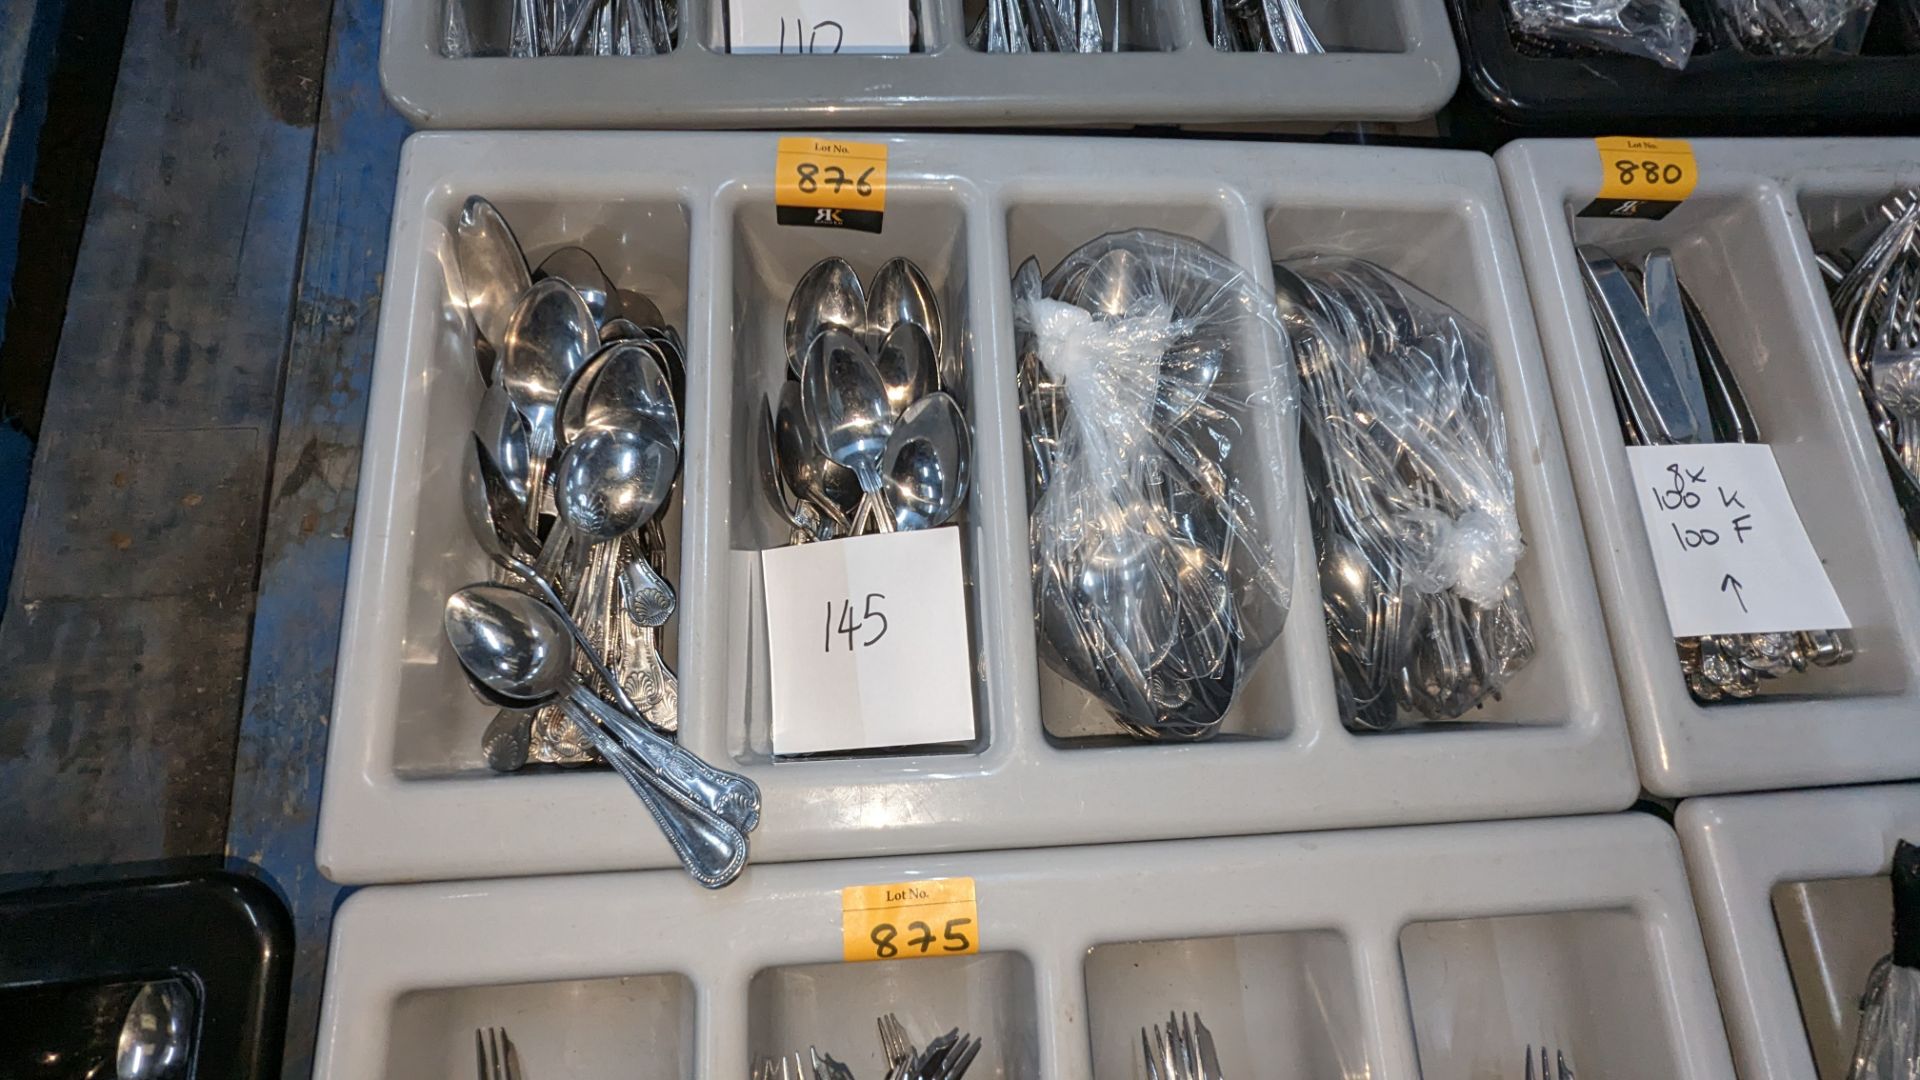 Quantity of cutlery plus the multi-compartment tray in which the lot is displayed. This particular